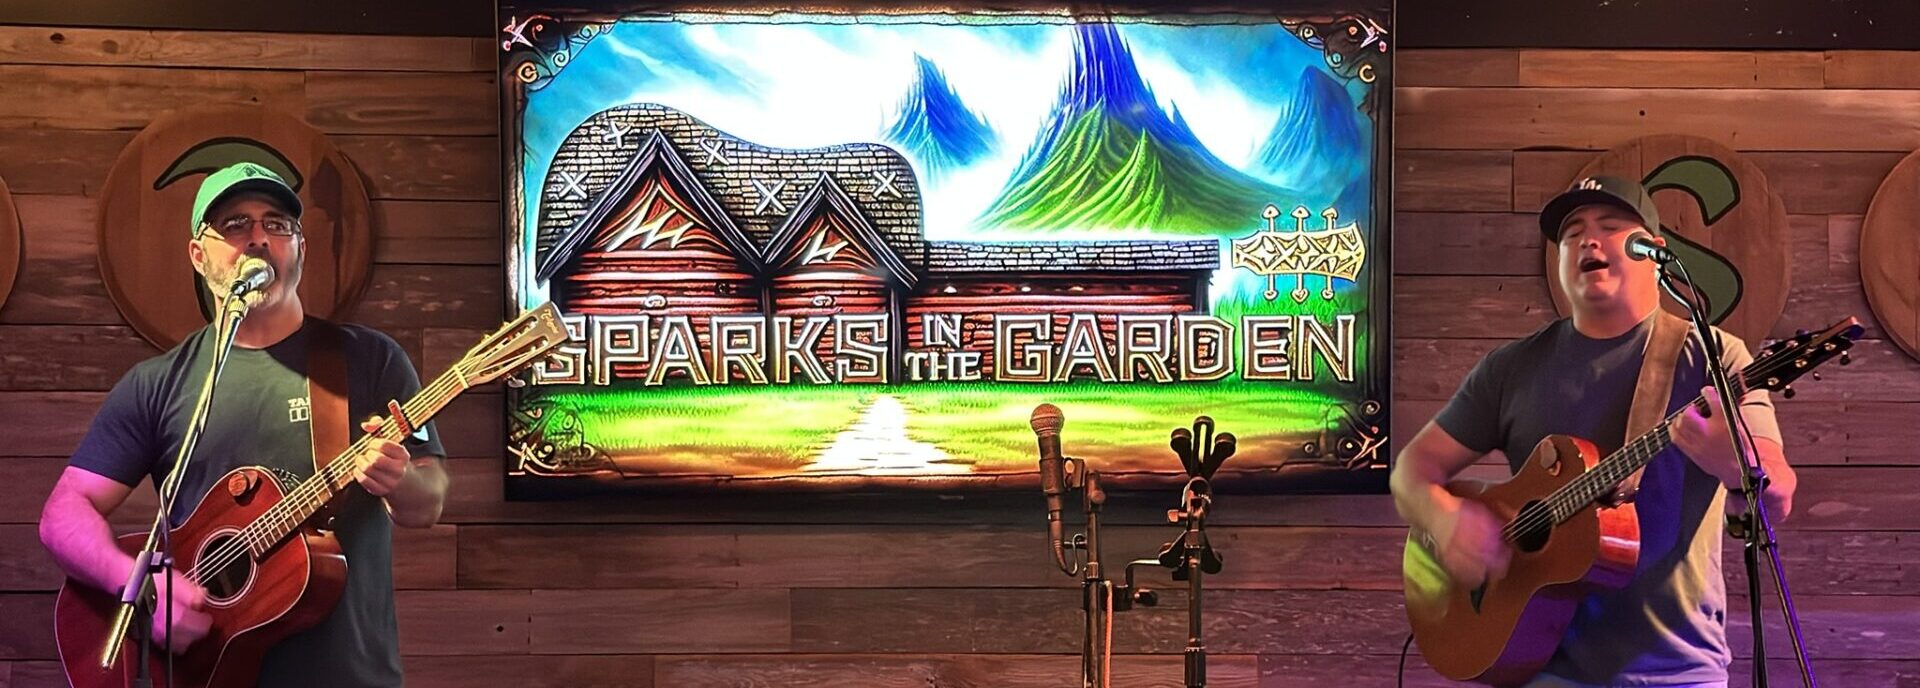 Colorado by SPARKS IN THE GARDEN: Review